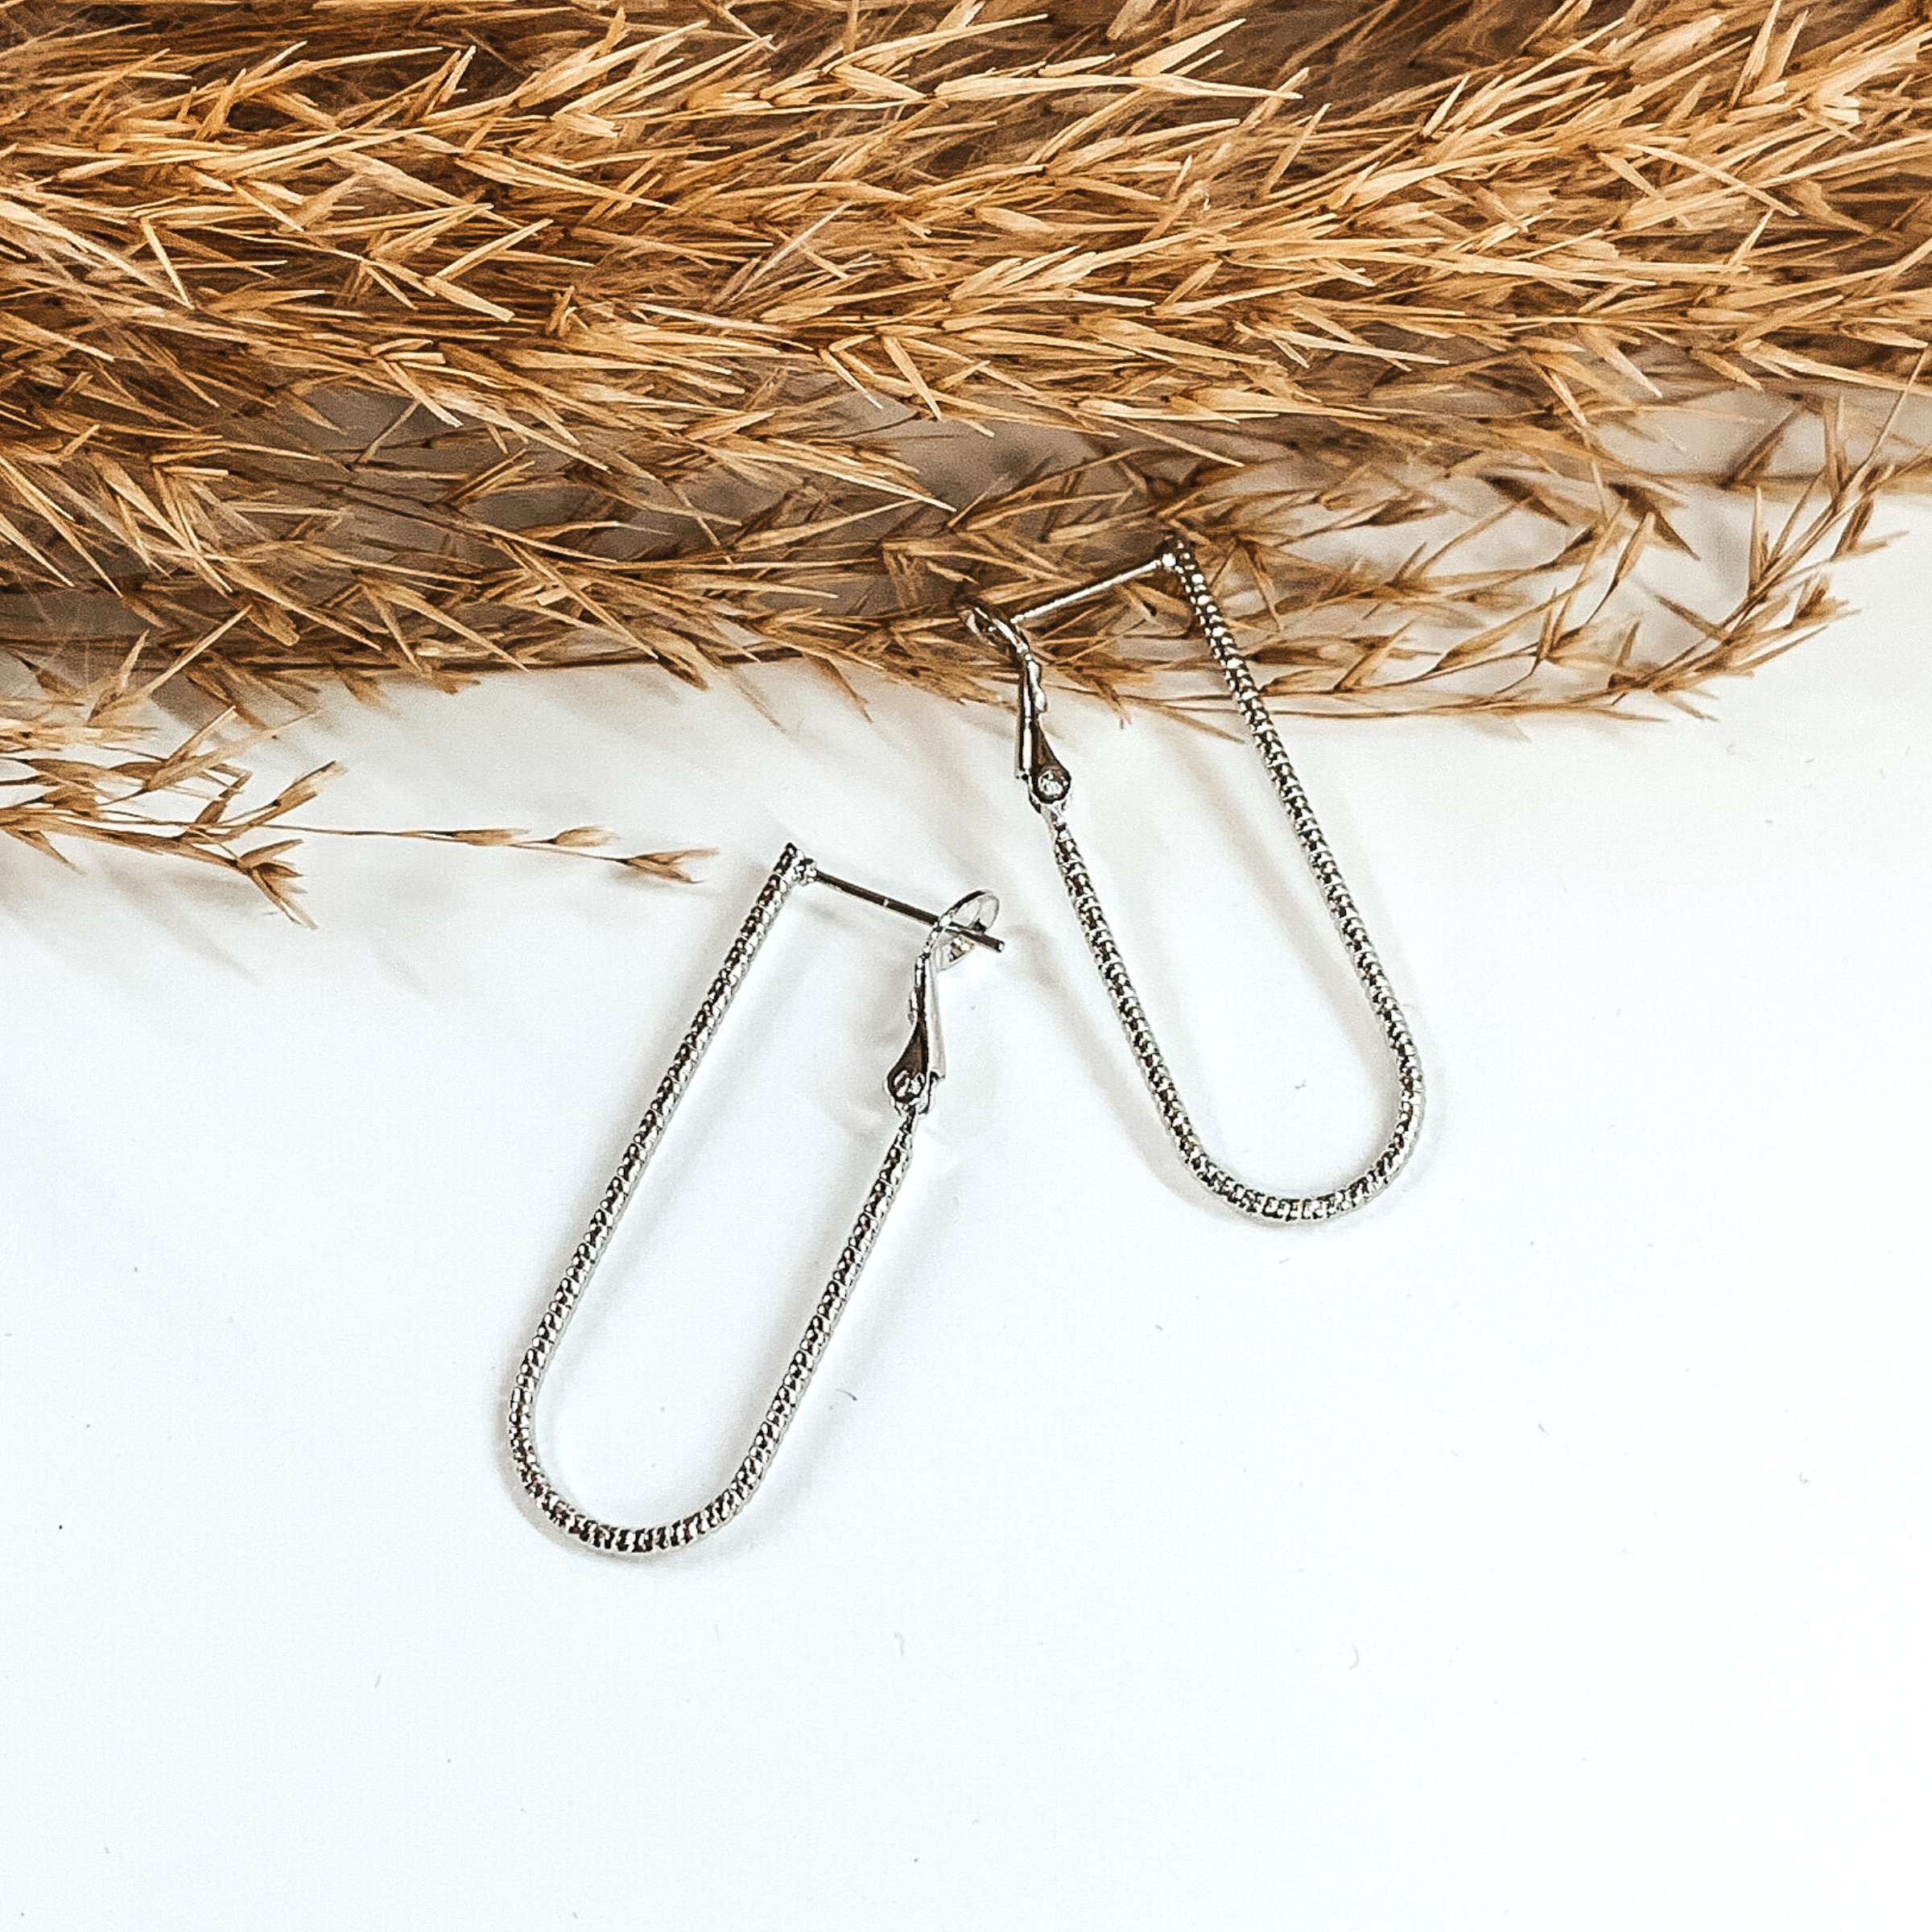 Silver u-shaped hoop earrings that have a striped pattern. These hoops are pictured on a white background and partially laying on some tan floral. 